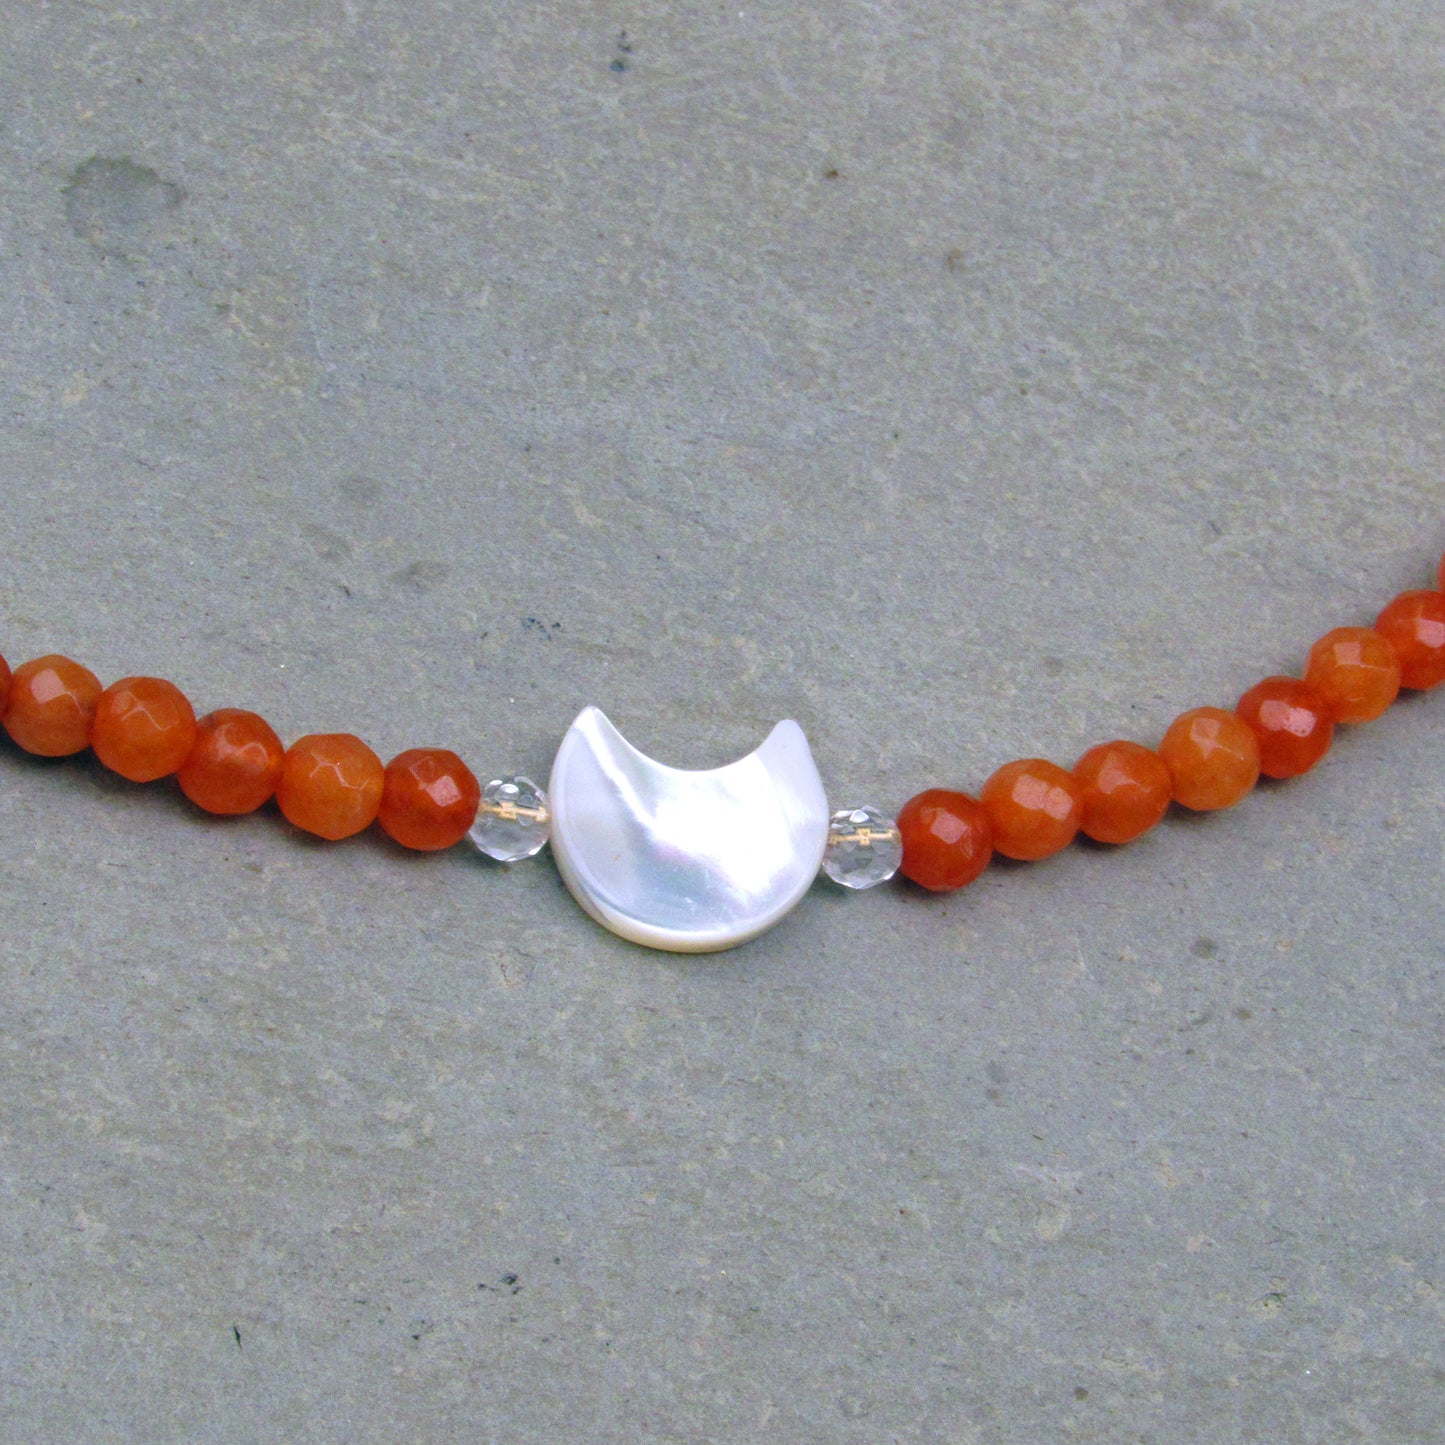 Mother of Pearl Moon Choker with Carnelian gemstone and 14 kt Gold Filled components